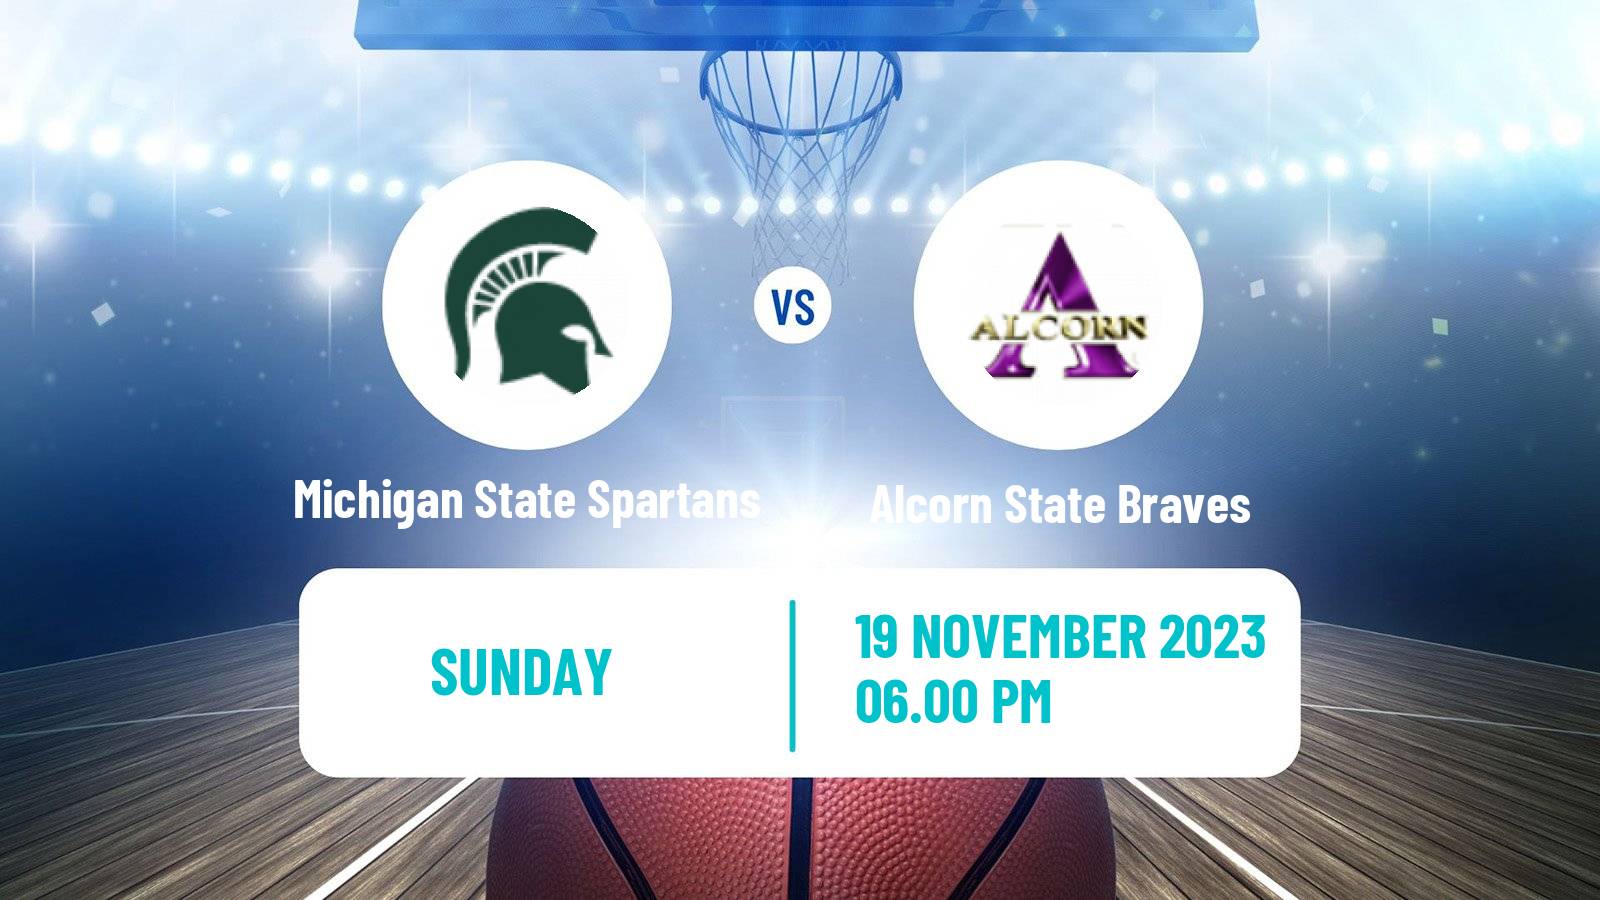 Basketball NCAA College Basketball Michigan State Spartans - Alcorn State Braves